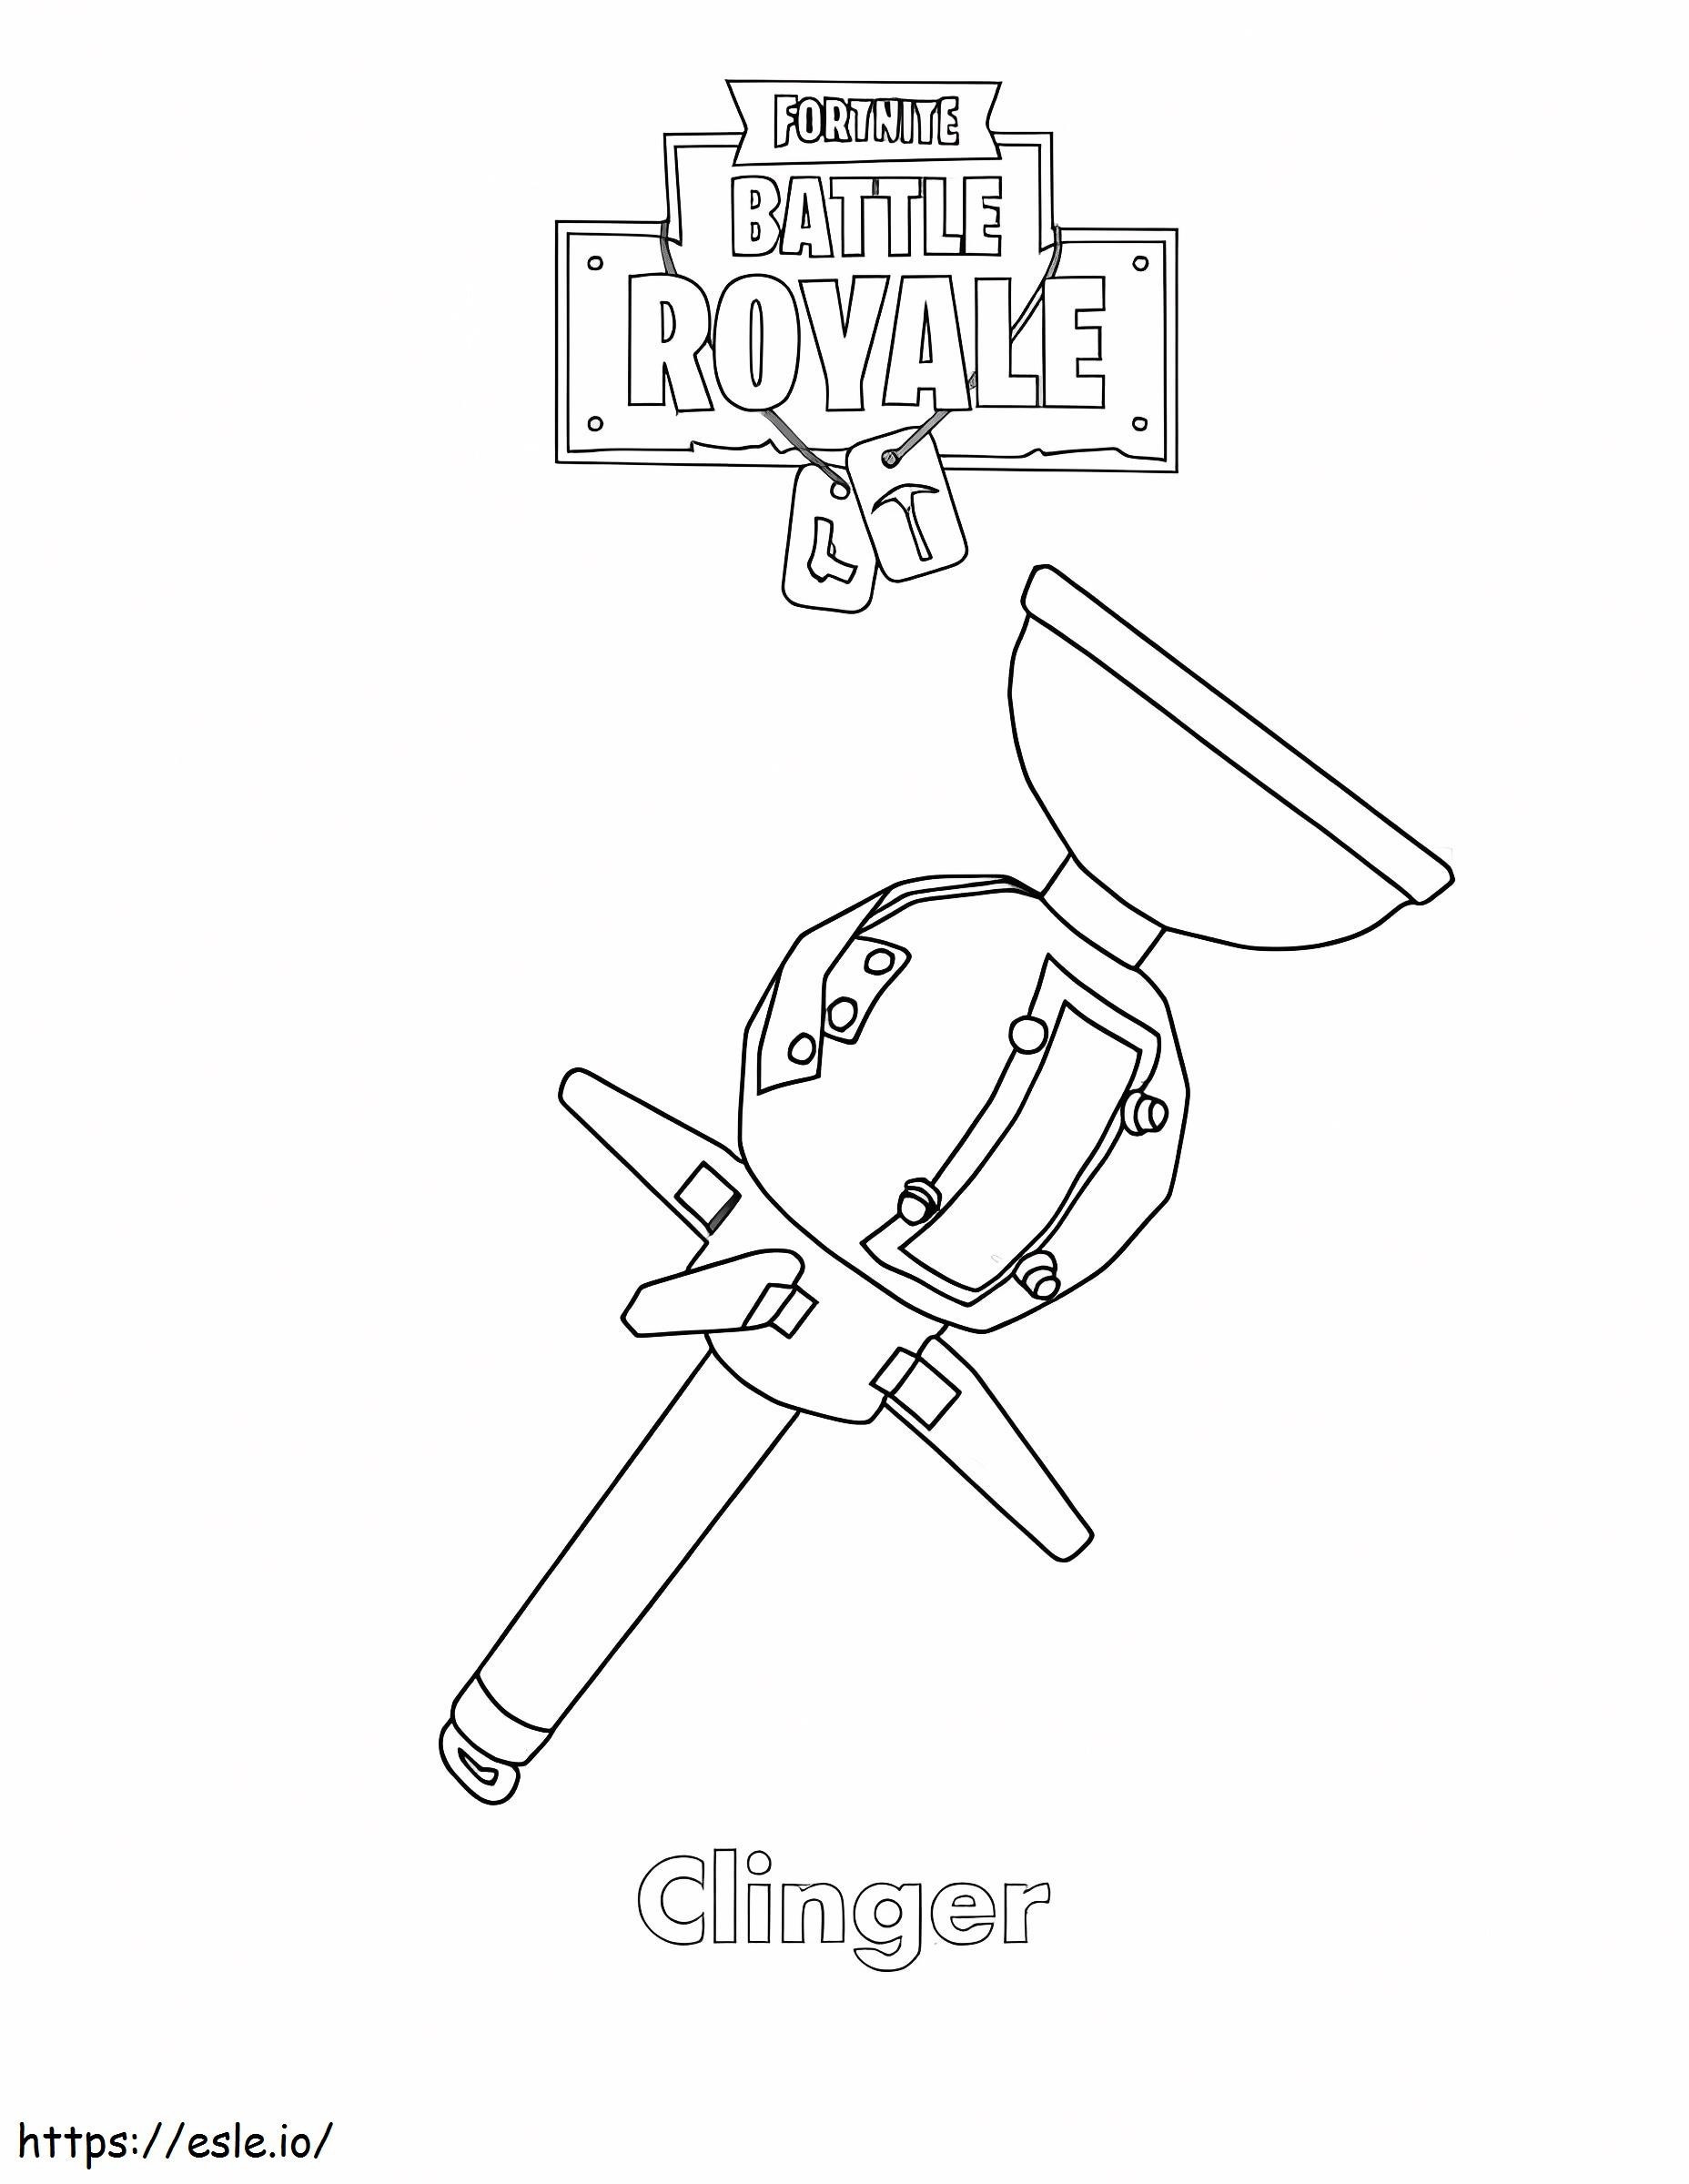 1541148088 26 Clinger Fortnite Coloring coloring page